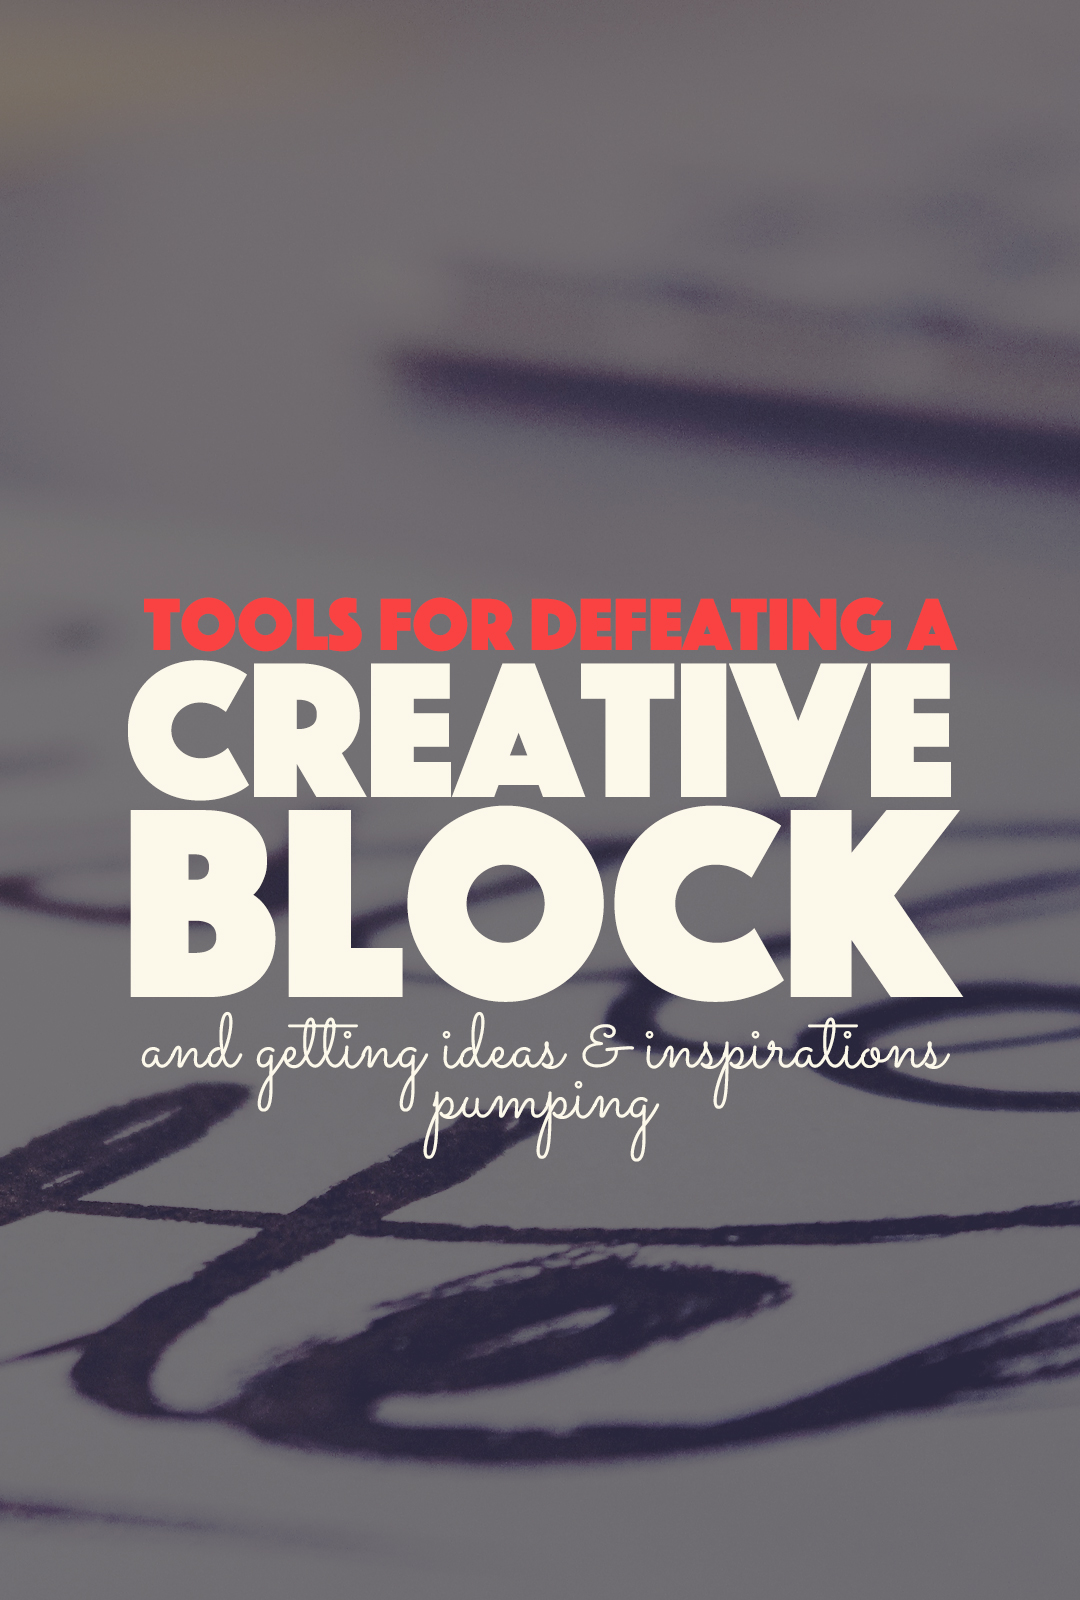 Tools for Defeating a Creative Block | http://BananaBloom.com #creativity #tools #writing #crafts #howto